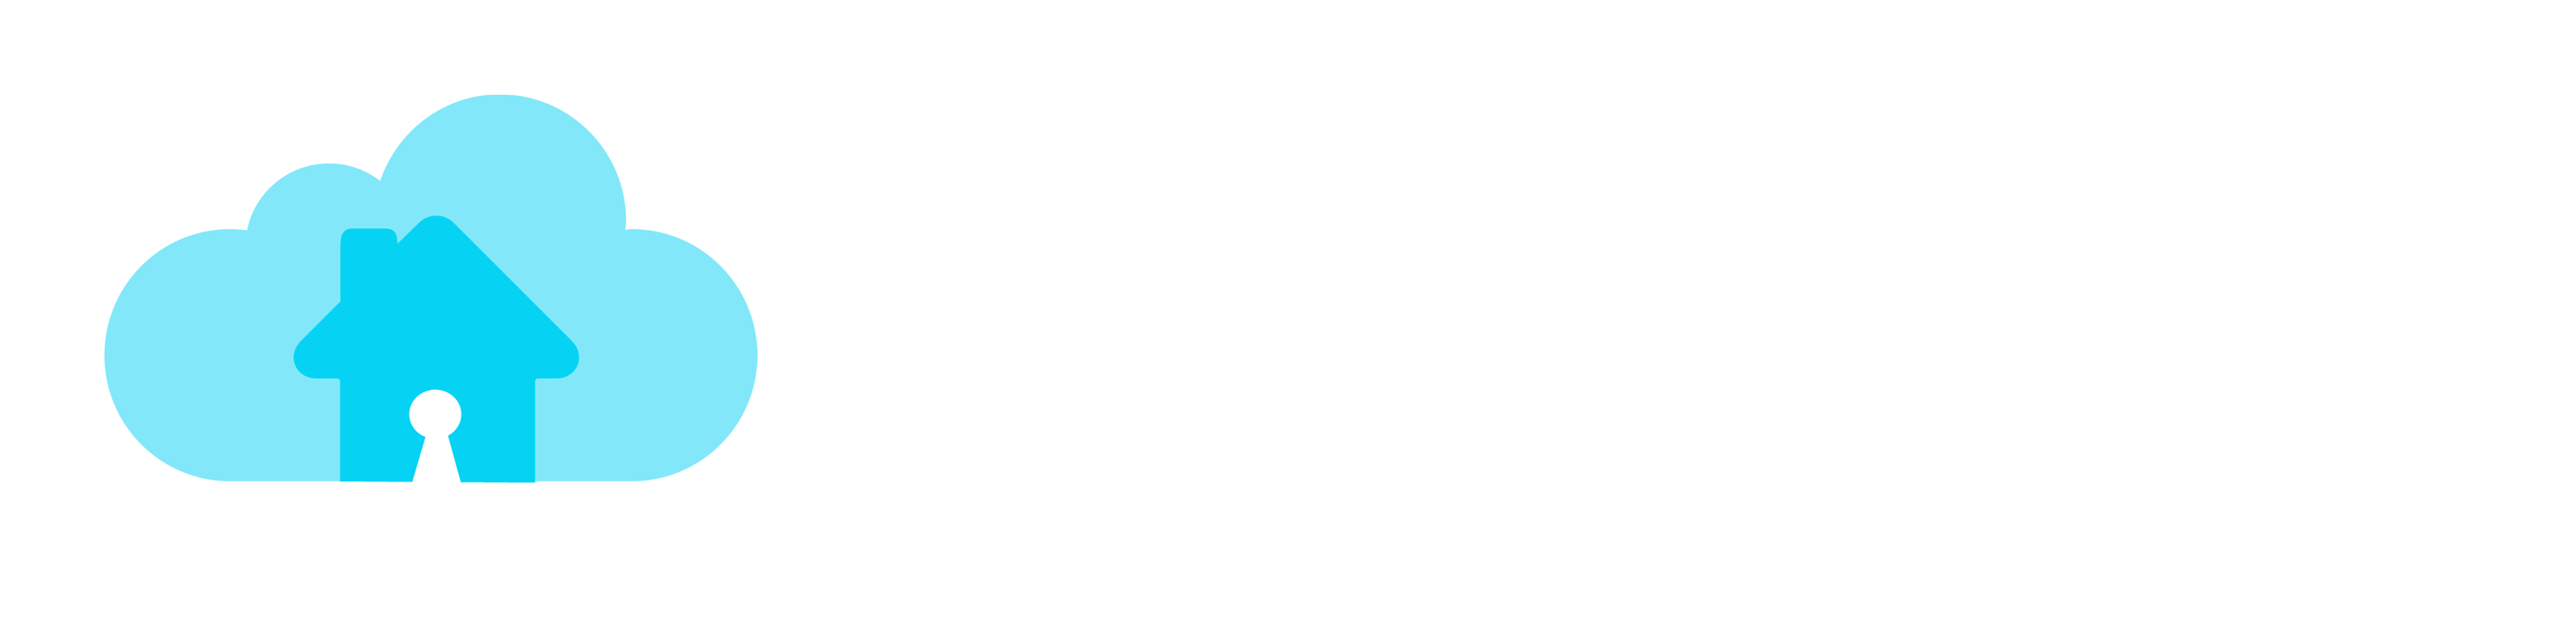 Bnbconnected